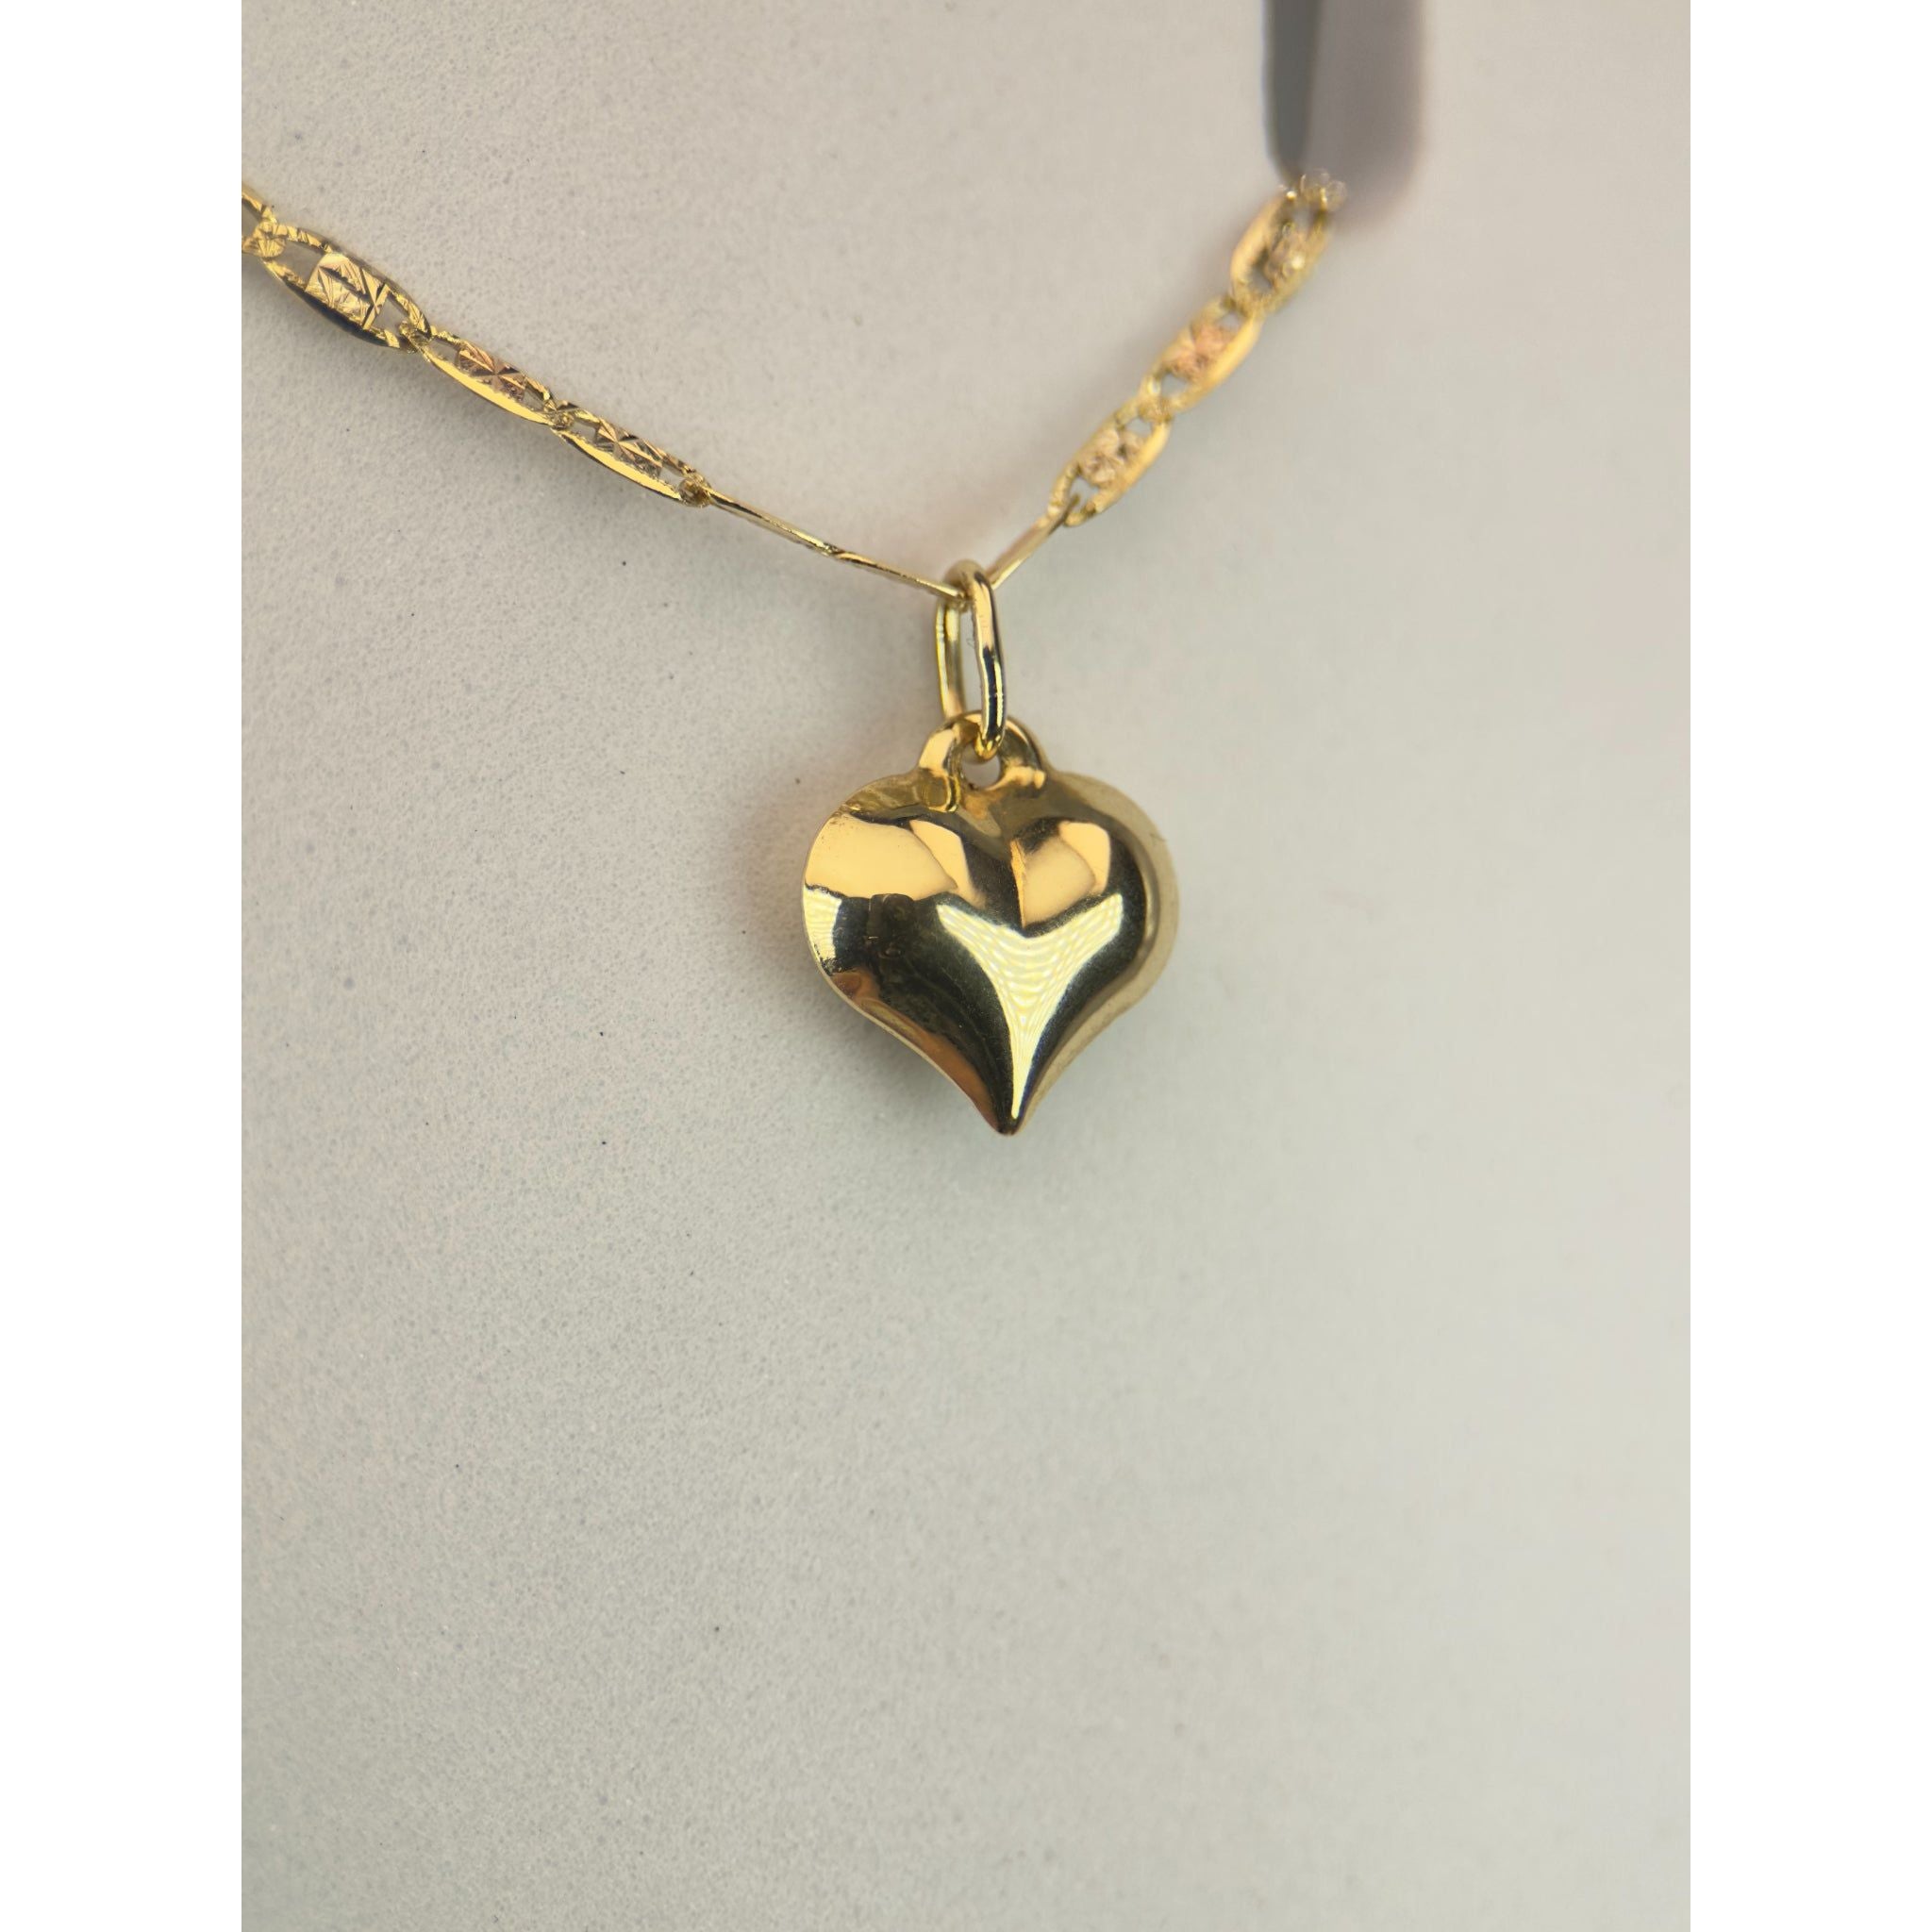 DR1917 - 14K Yellow Gold,14K Rose Gold - Gold Chain & Charm - 14K Gold Puff Heart